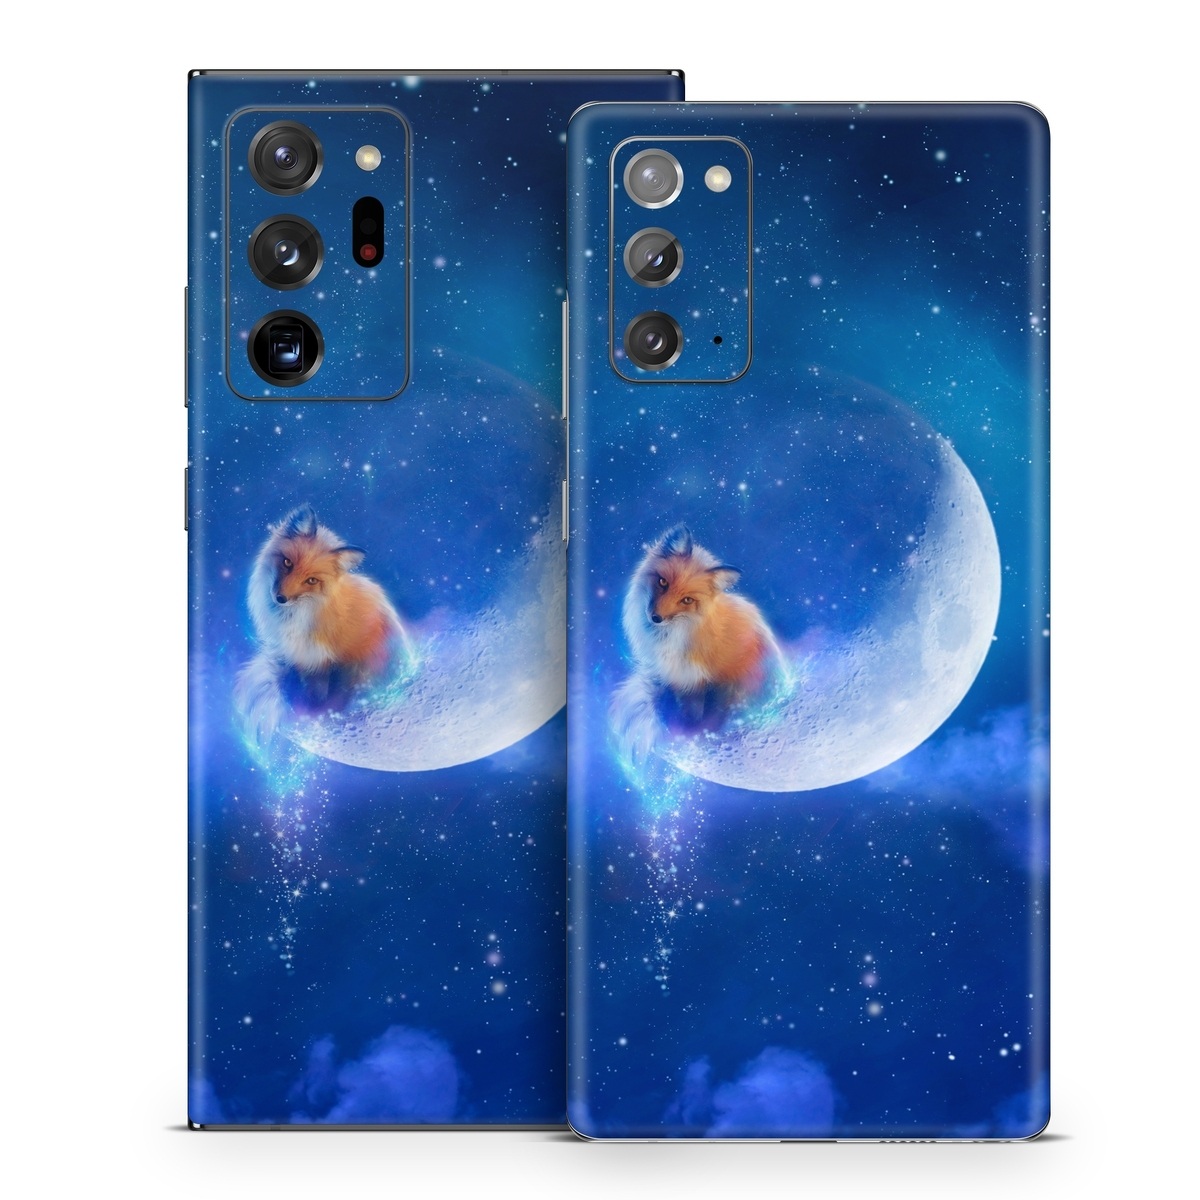 Samsung Galaxy Note 20 Skin design of Sky, Atmosphere, Astronomical object, Outer space, Space, Universe, Illustration, Nebula, Galaxy, Fictional character, with blue, black, gray colors